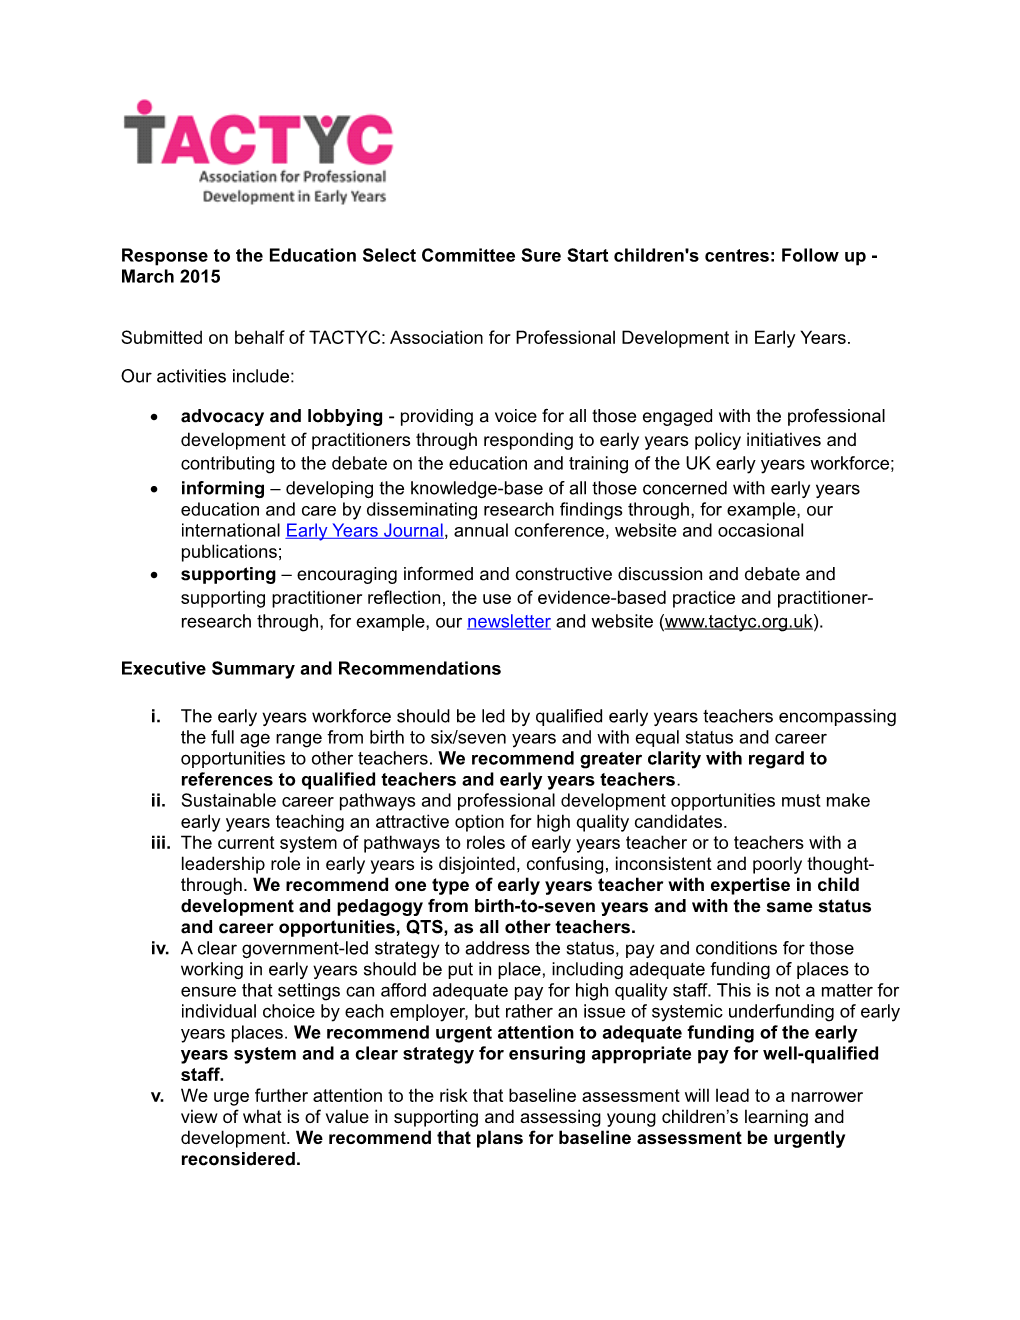 Submitted on Behalf of TACTYC: Association for Professional Development in Early Years